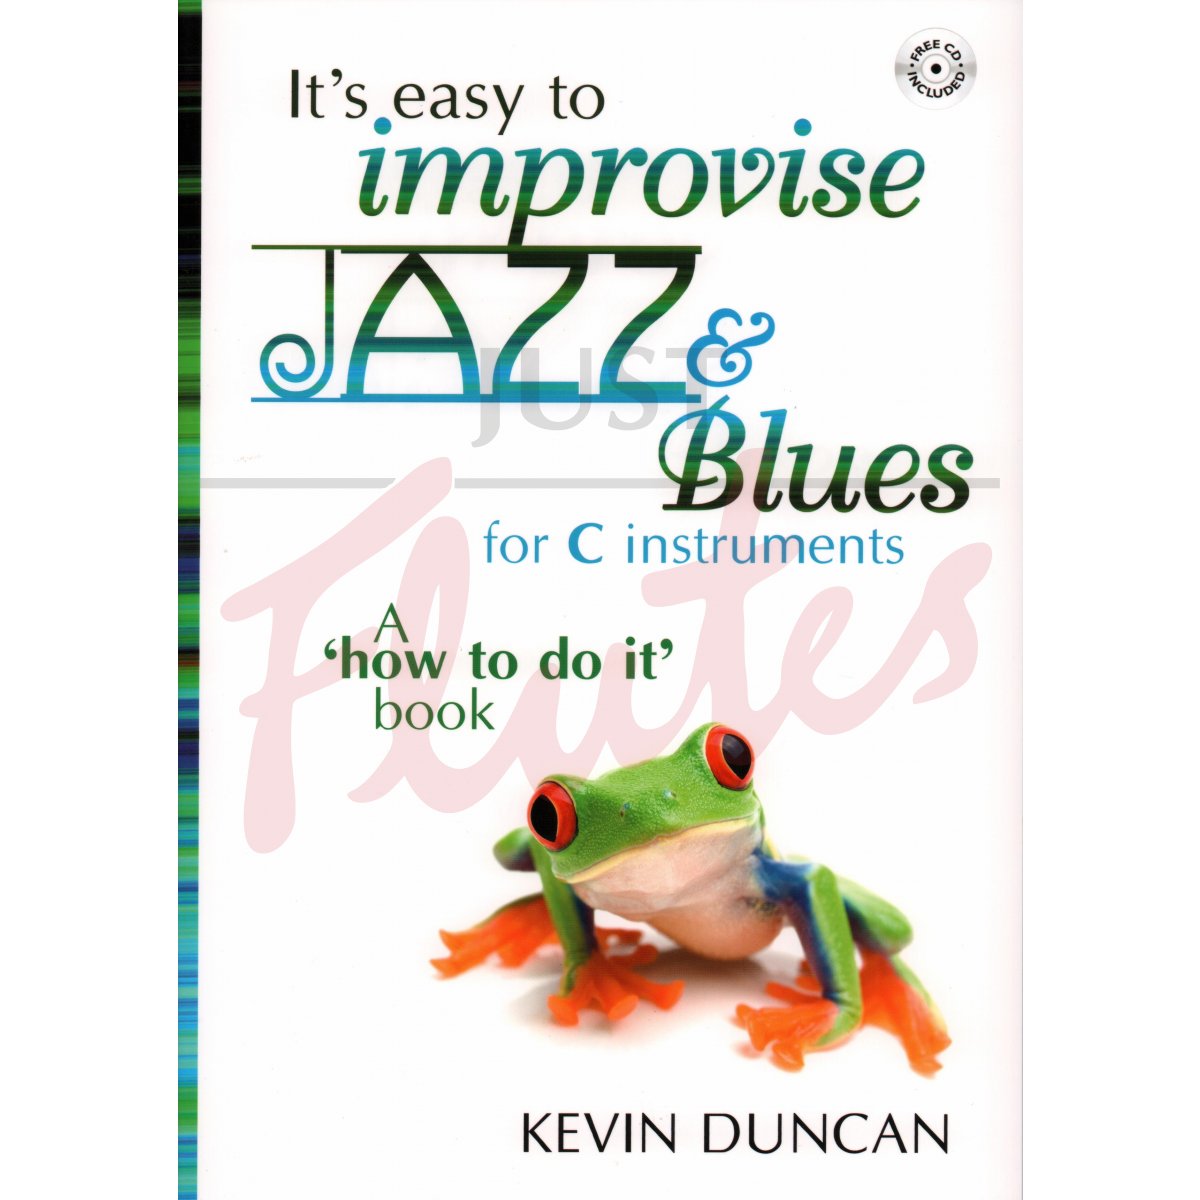 It's Easy to Improvise Jazz and Blues (for C instruments)